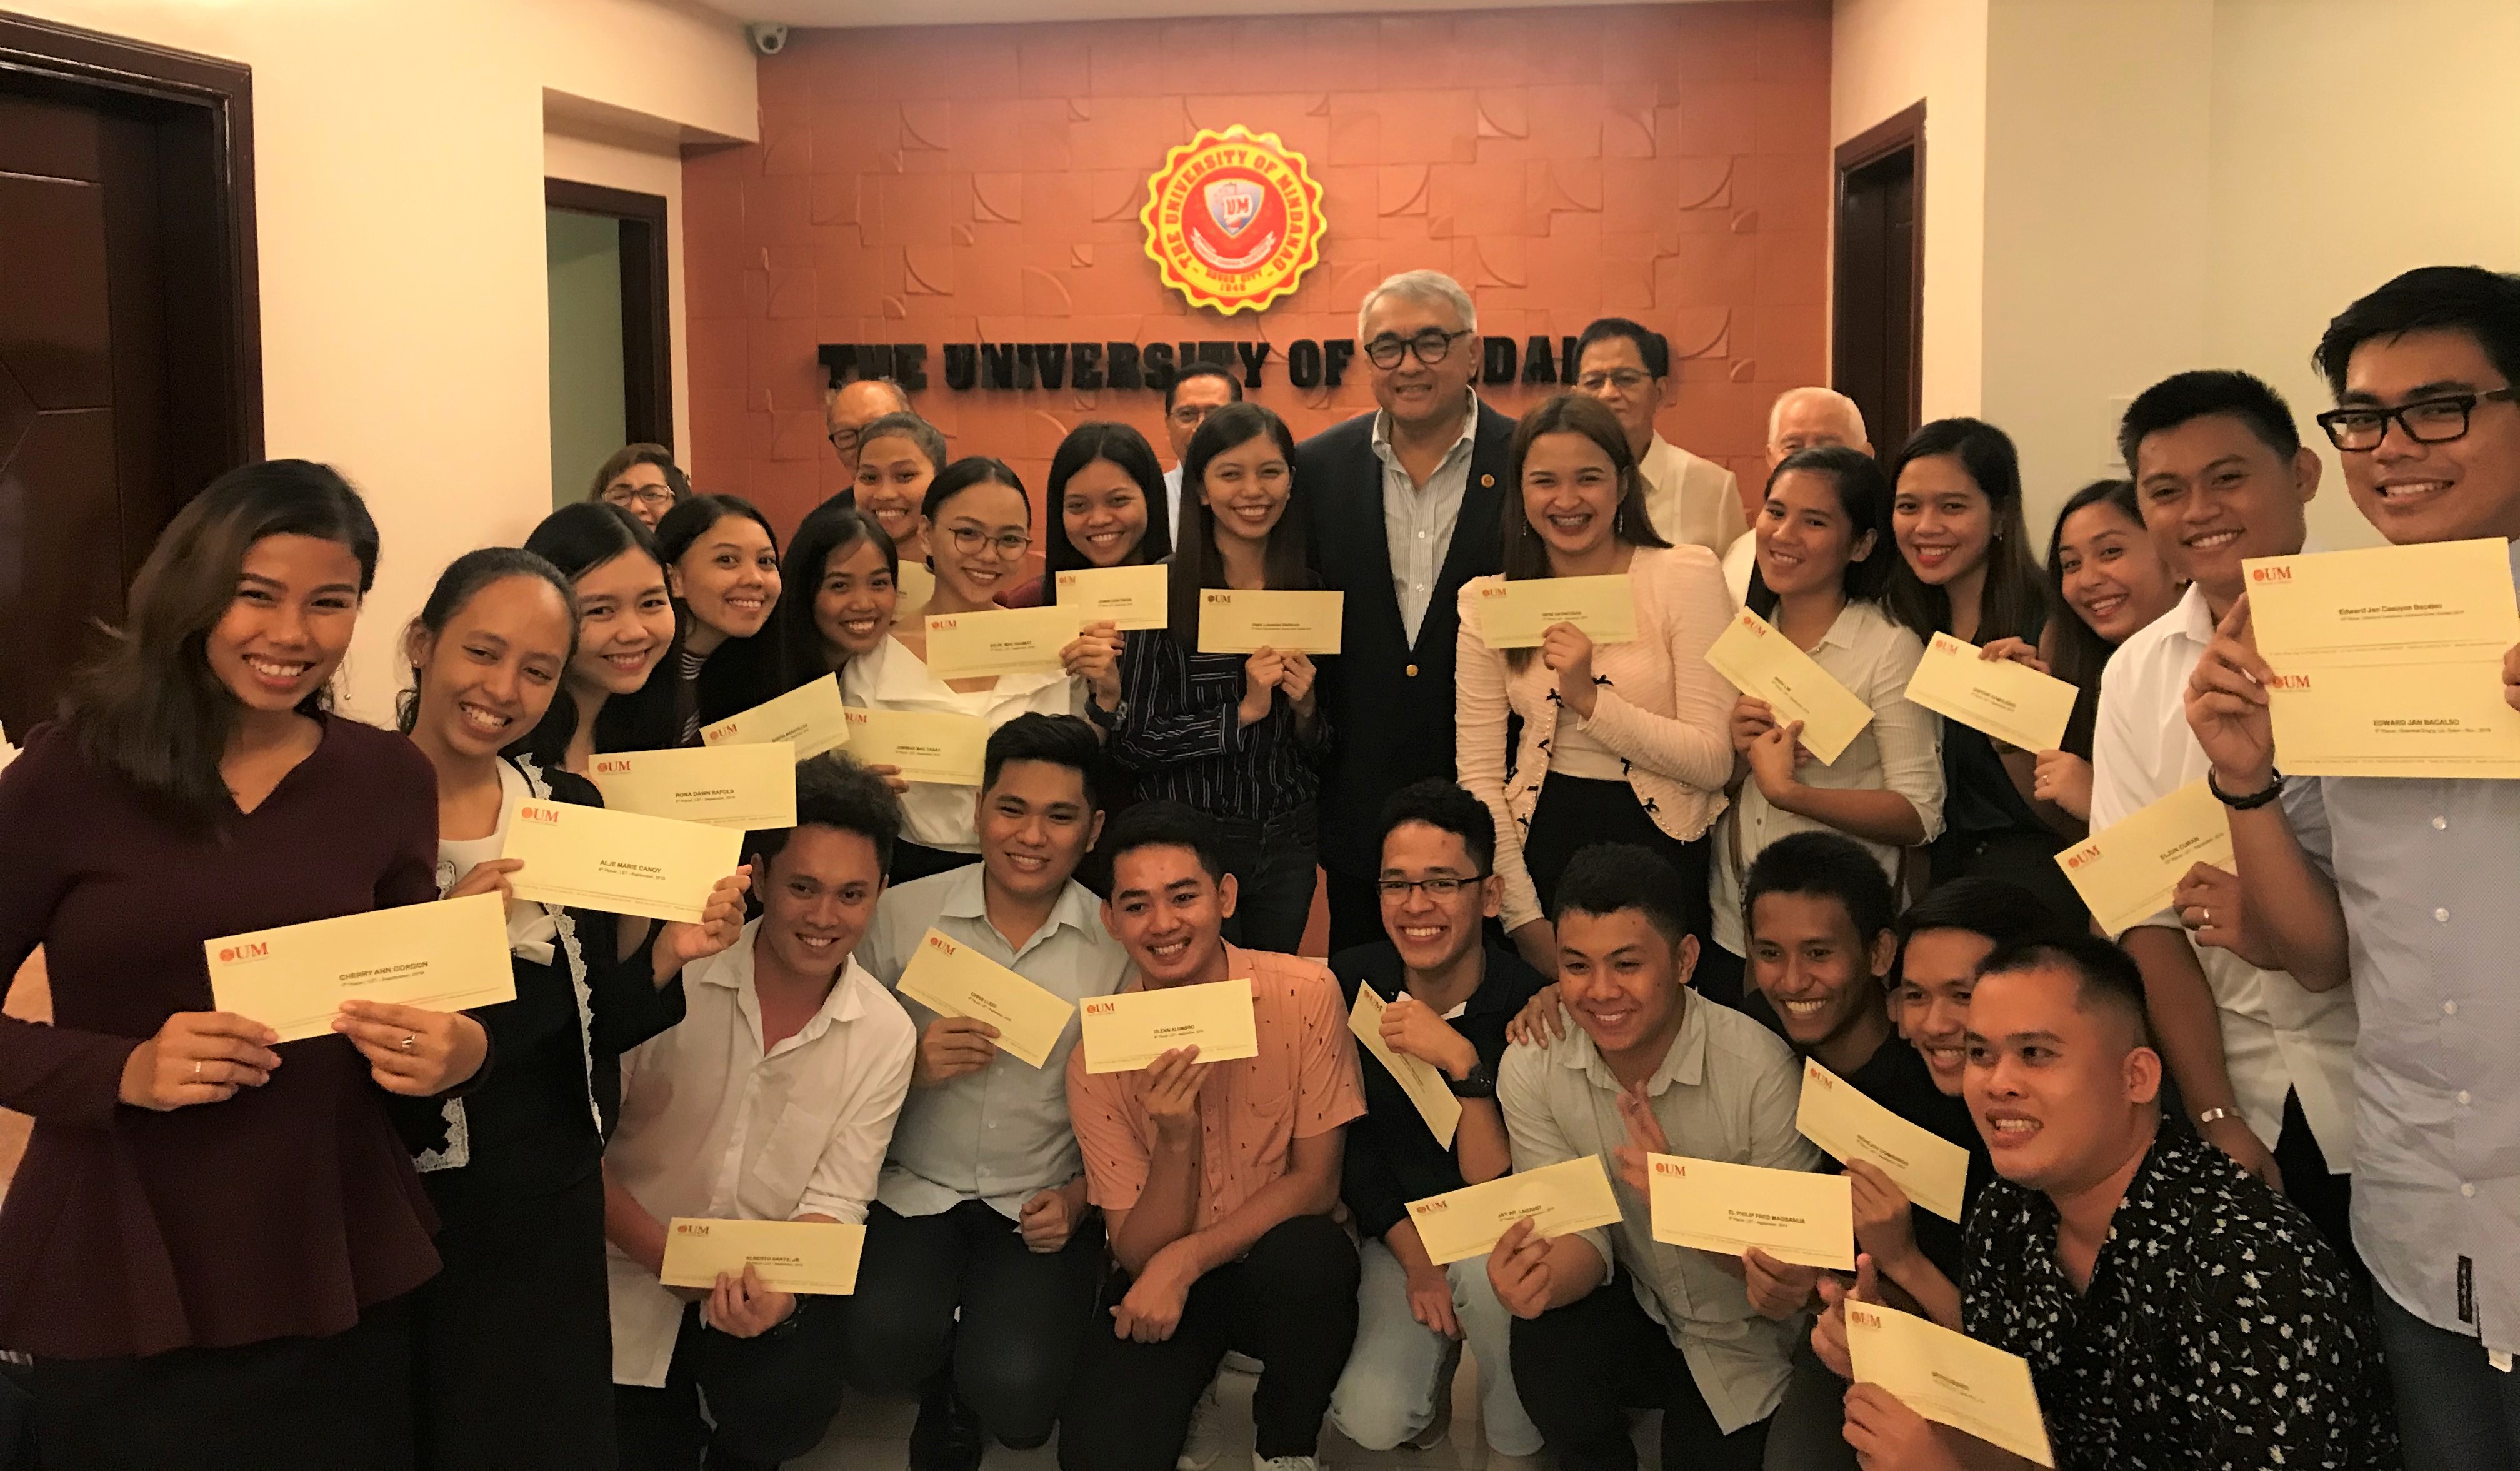 25 topnotchers receive awards from Dr. Torres and UM Board of Trustees